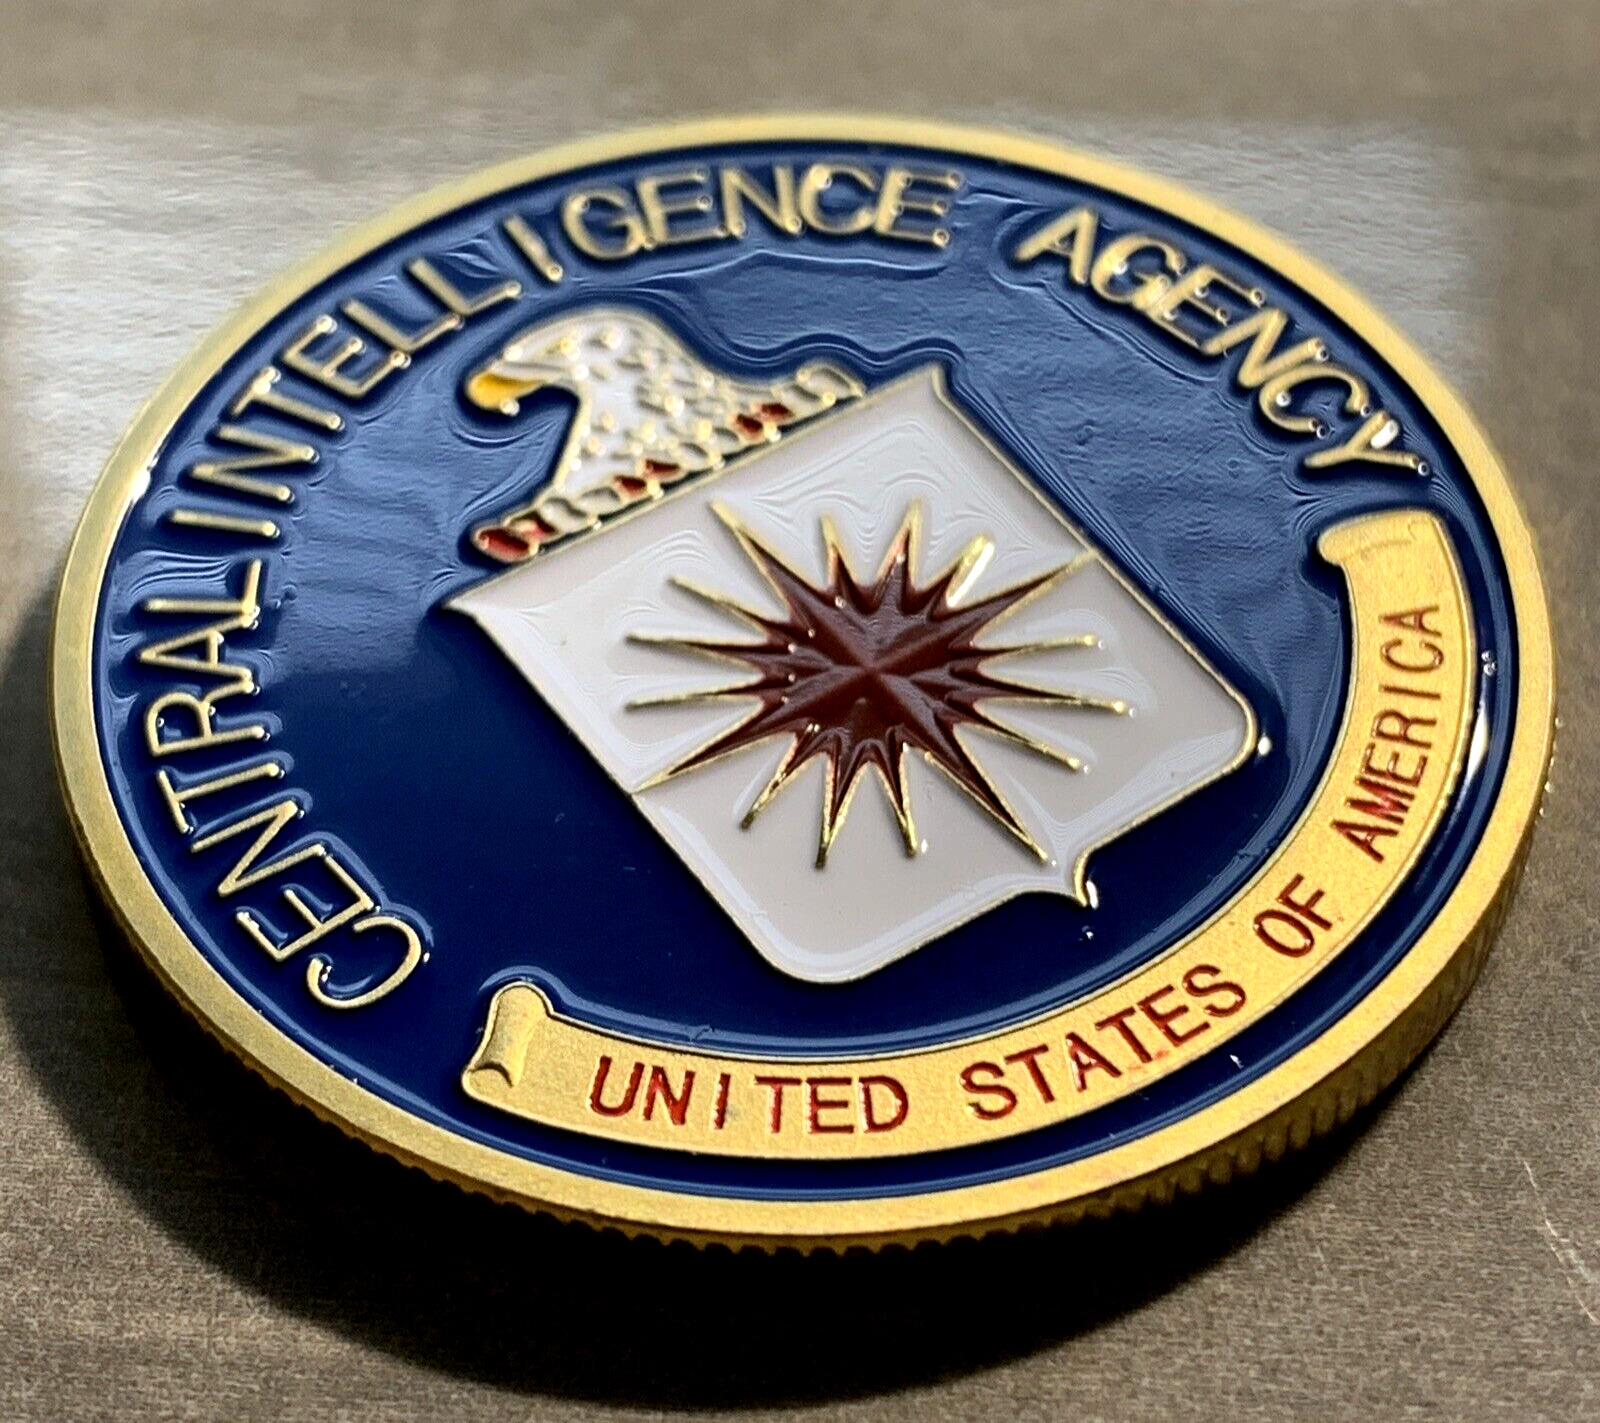 CIA Challenge Coin United States Central Intelligence Agency SPECIAL OFFER